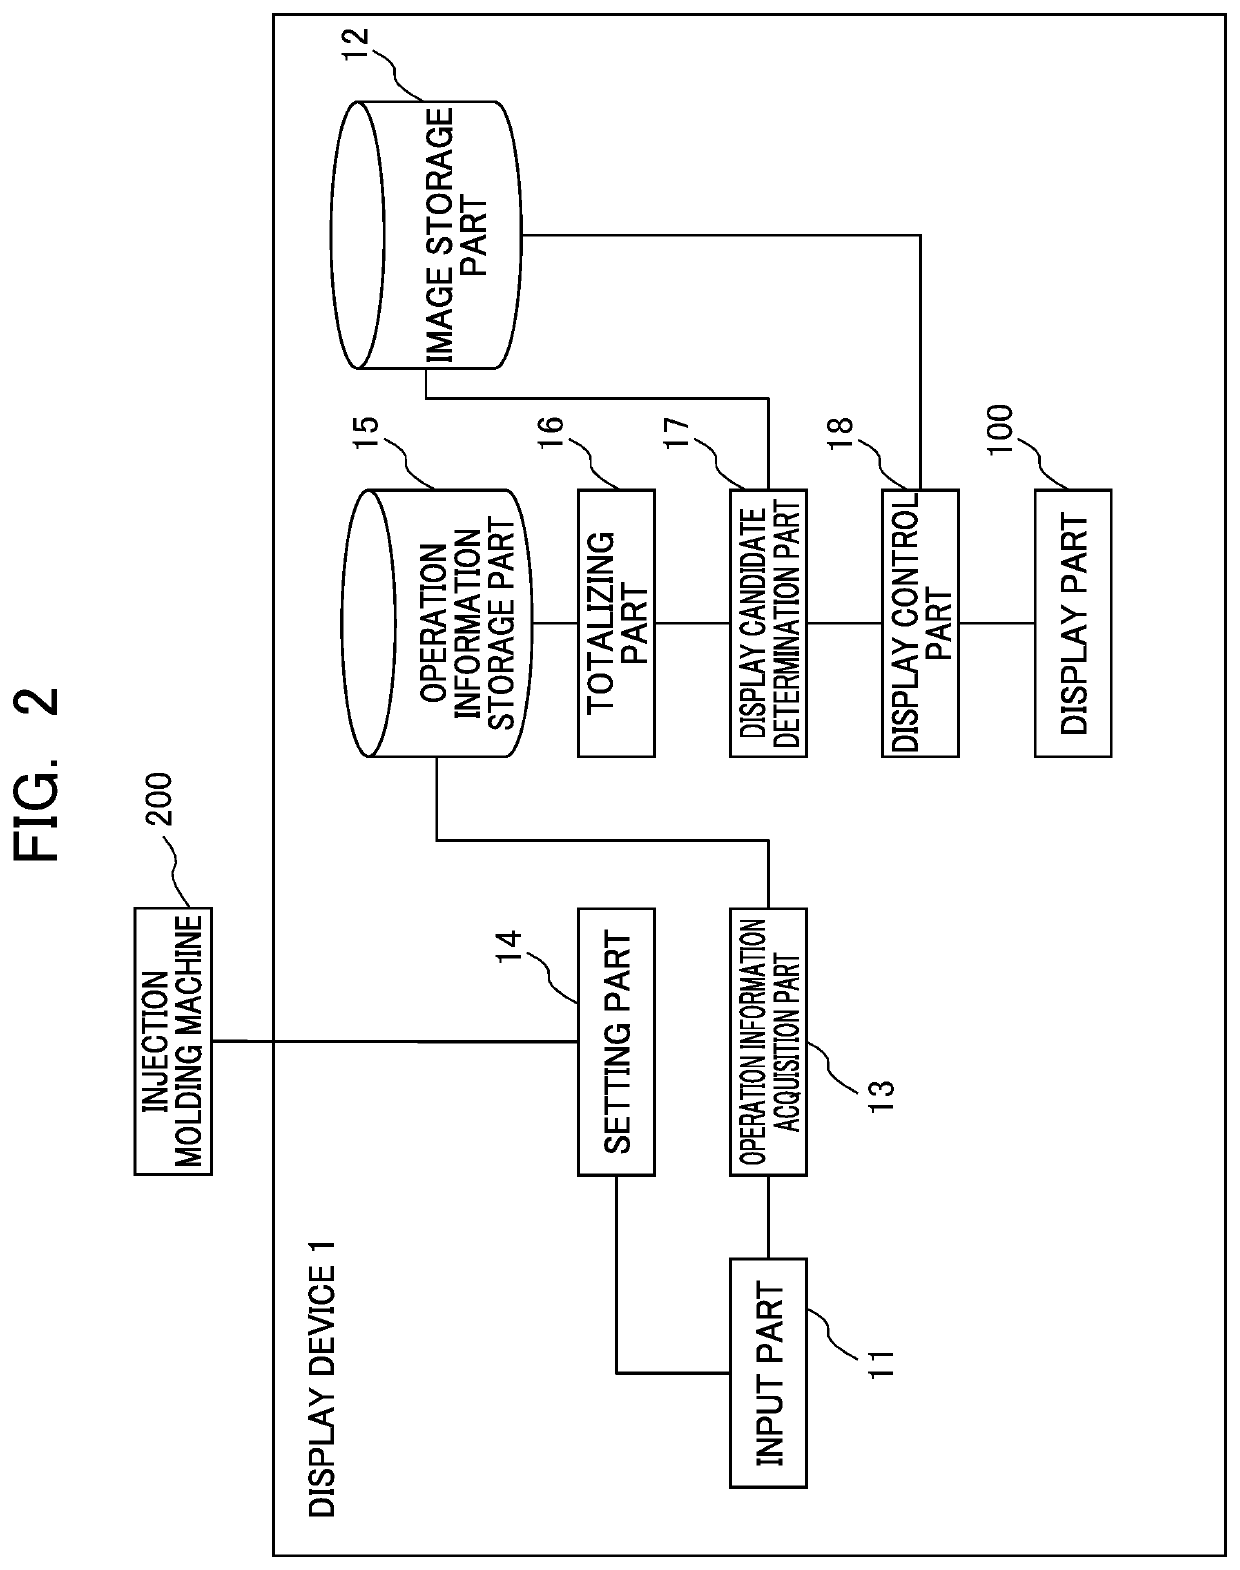 Display device for injection molding machine